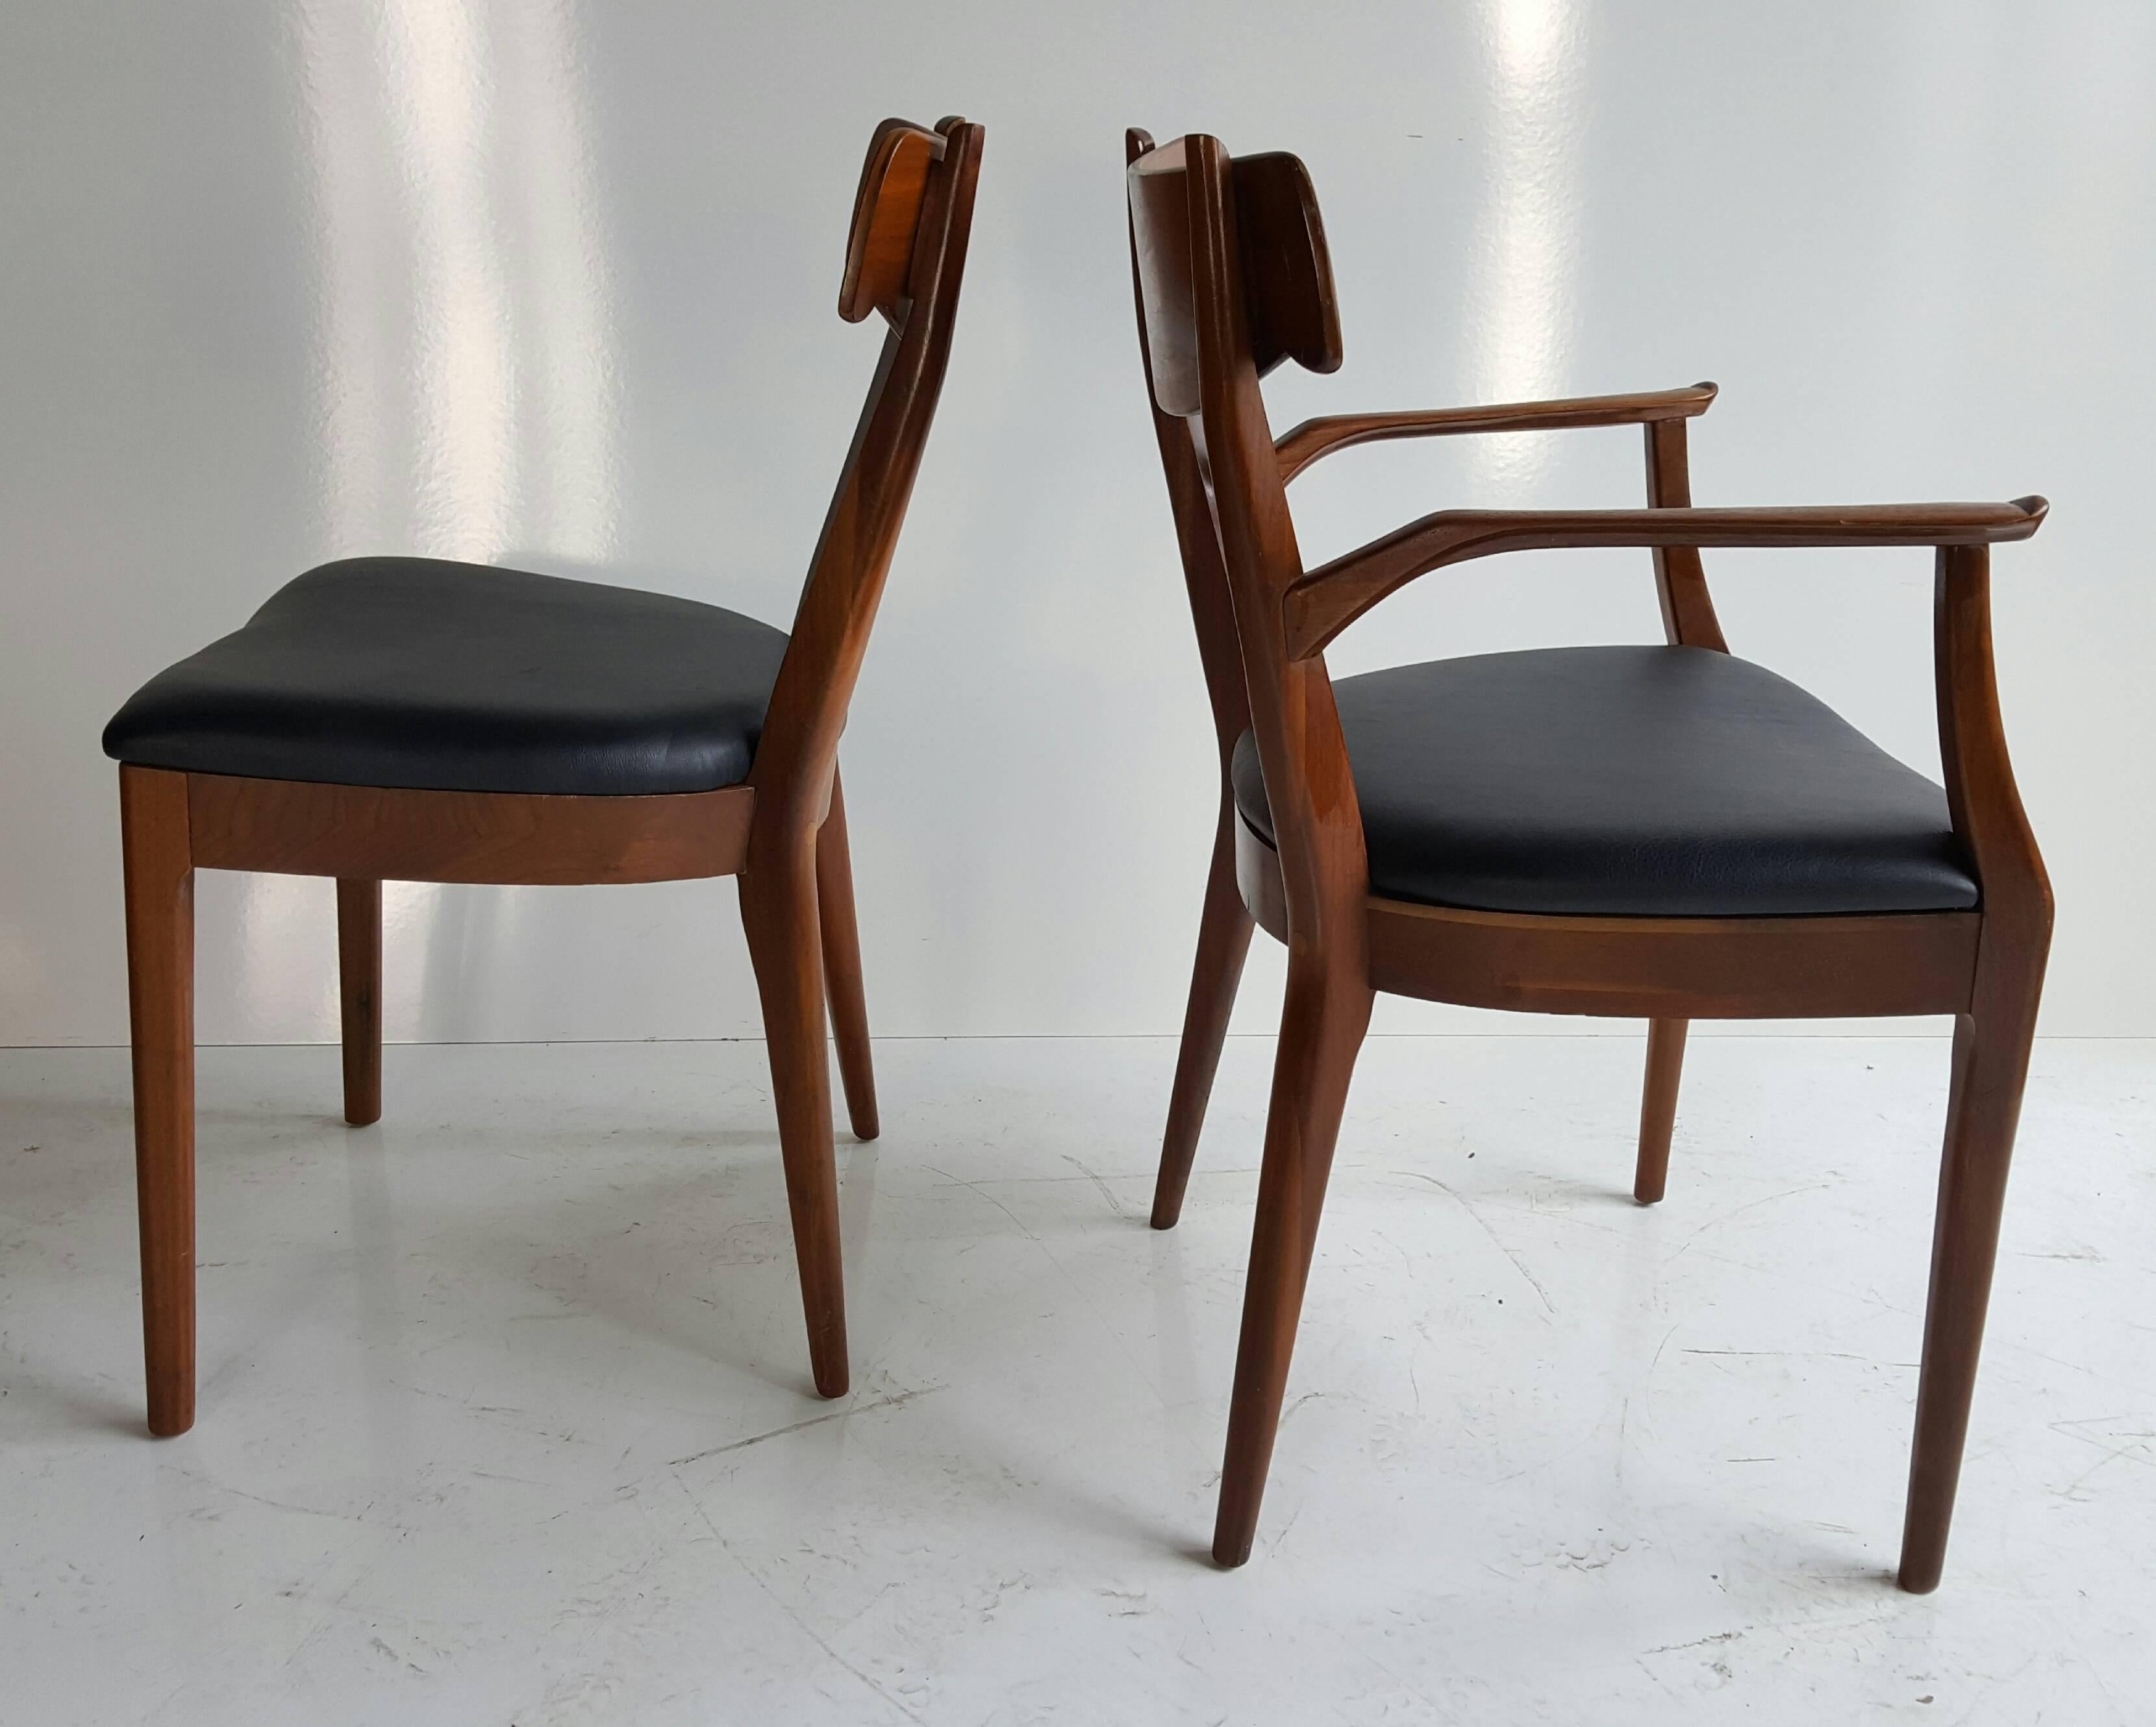 North American Set of Ten Mid-Century Dining Chairs by Kipp Stewart for Drexel